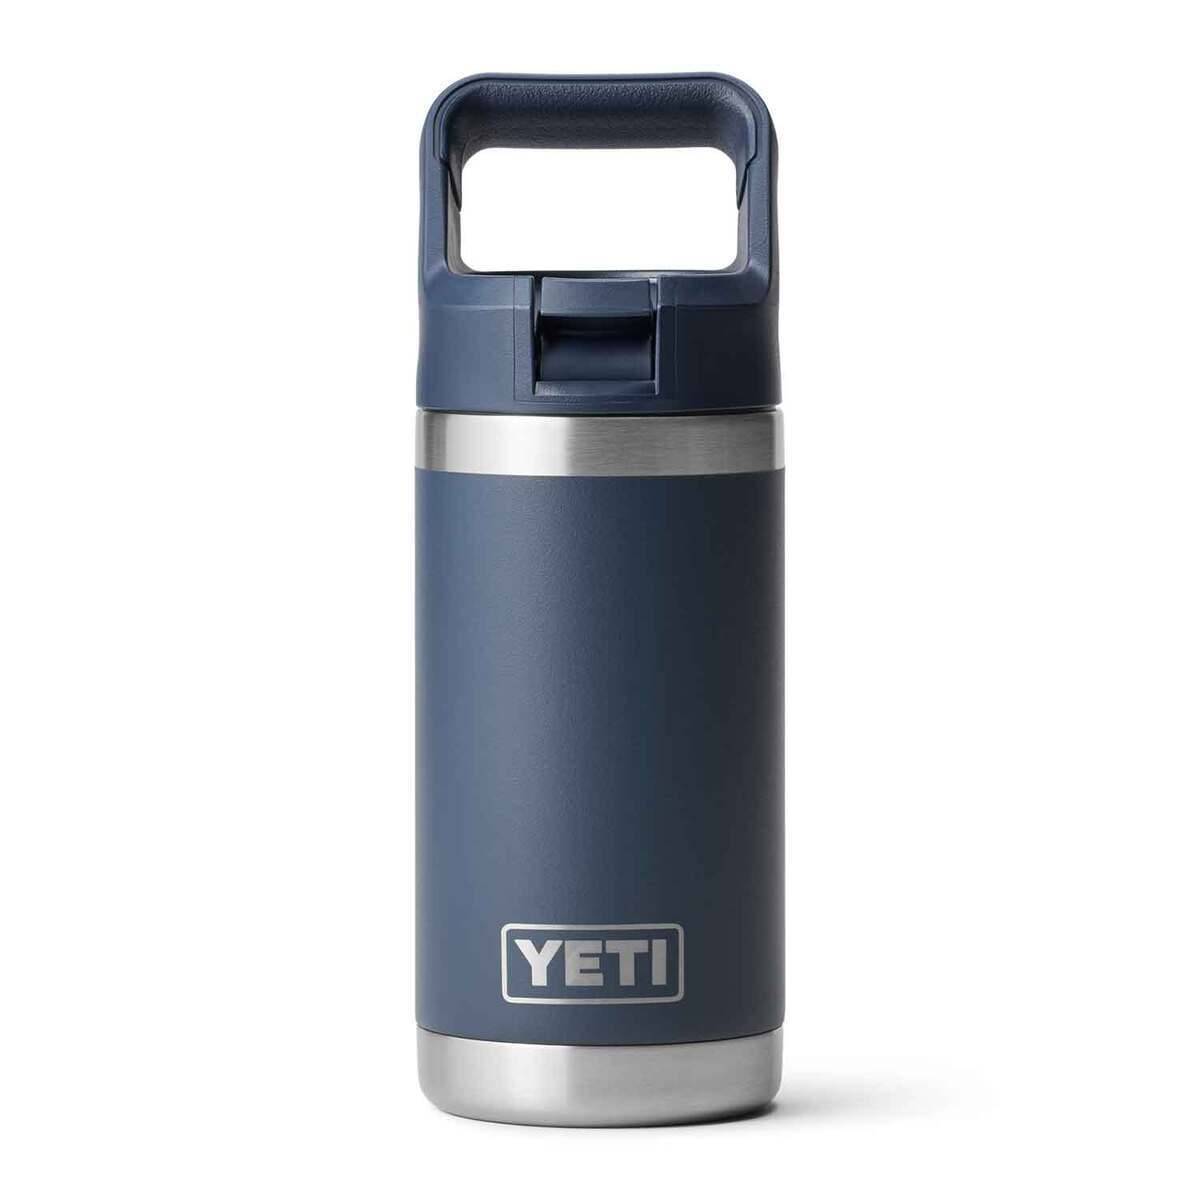 Yeti Rambler One Gallon Jug Heavy Duty Insulated Portable Water Carrier 